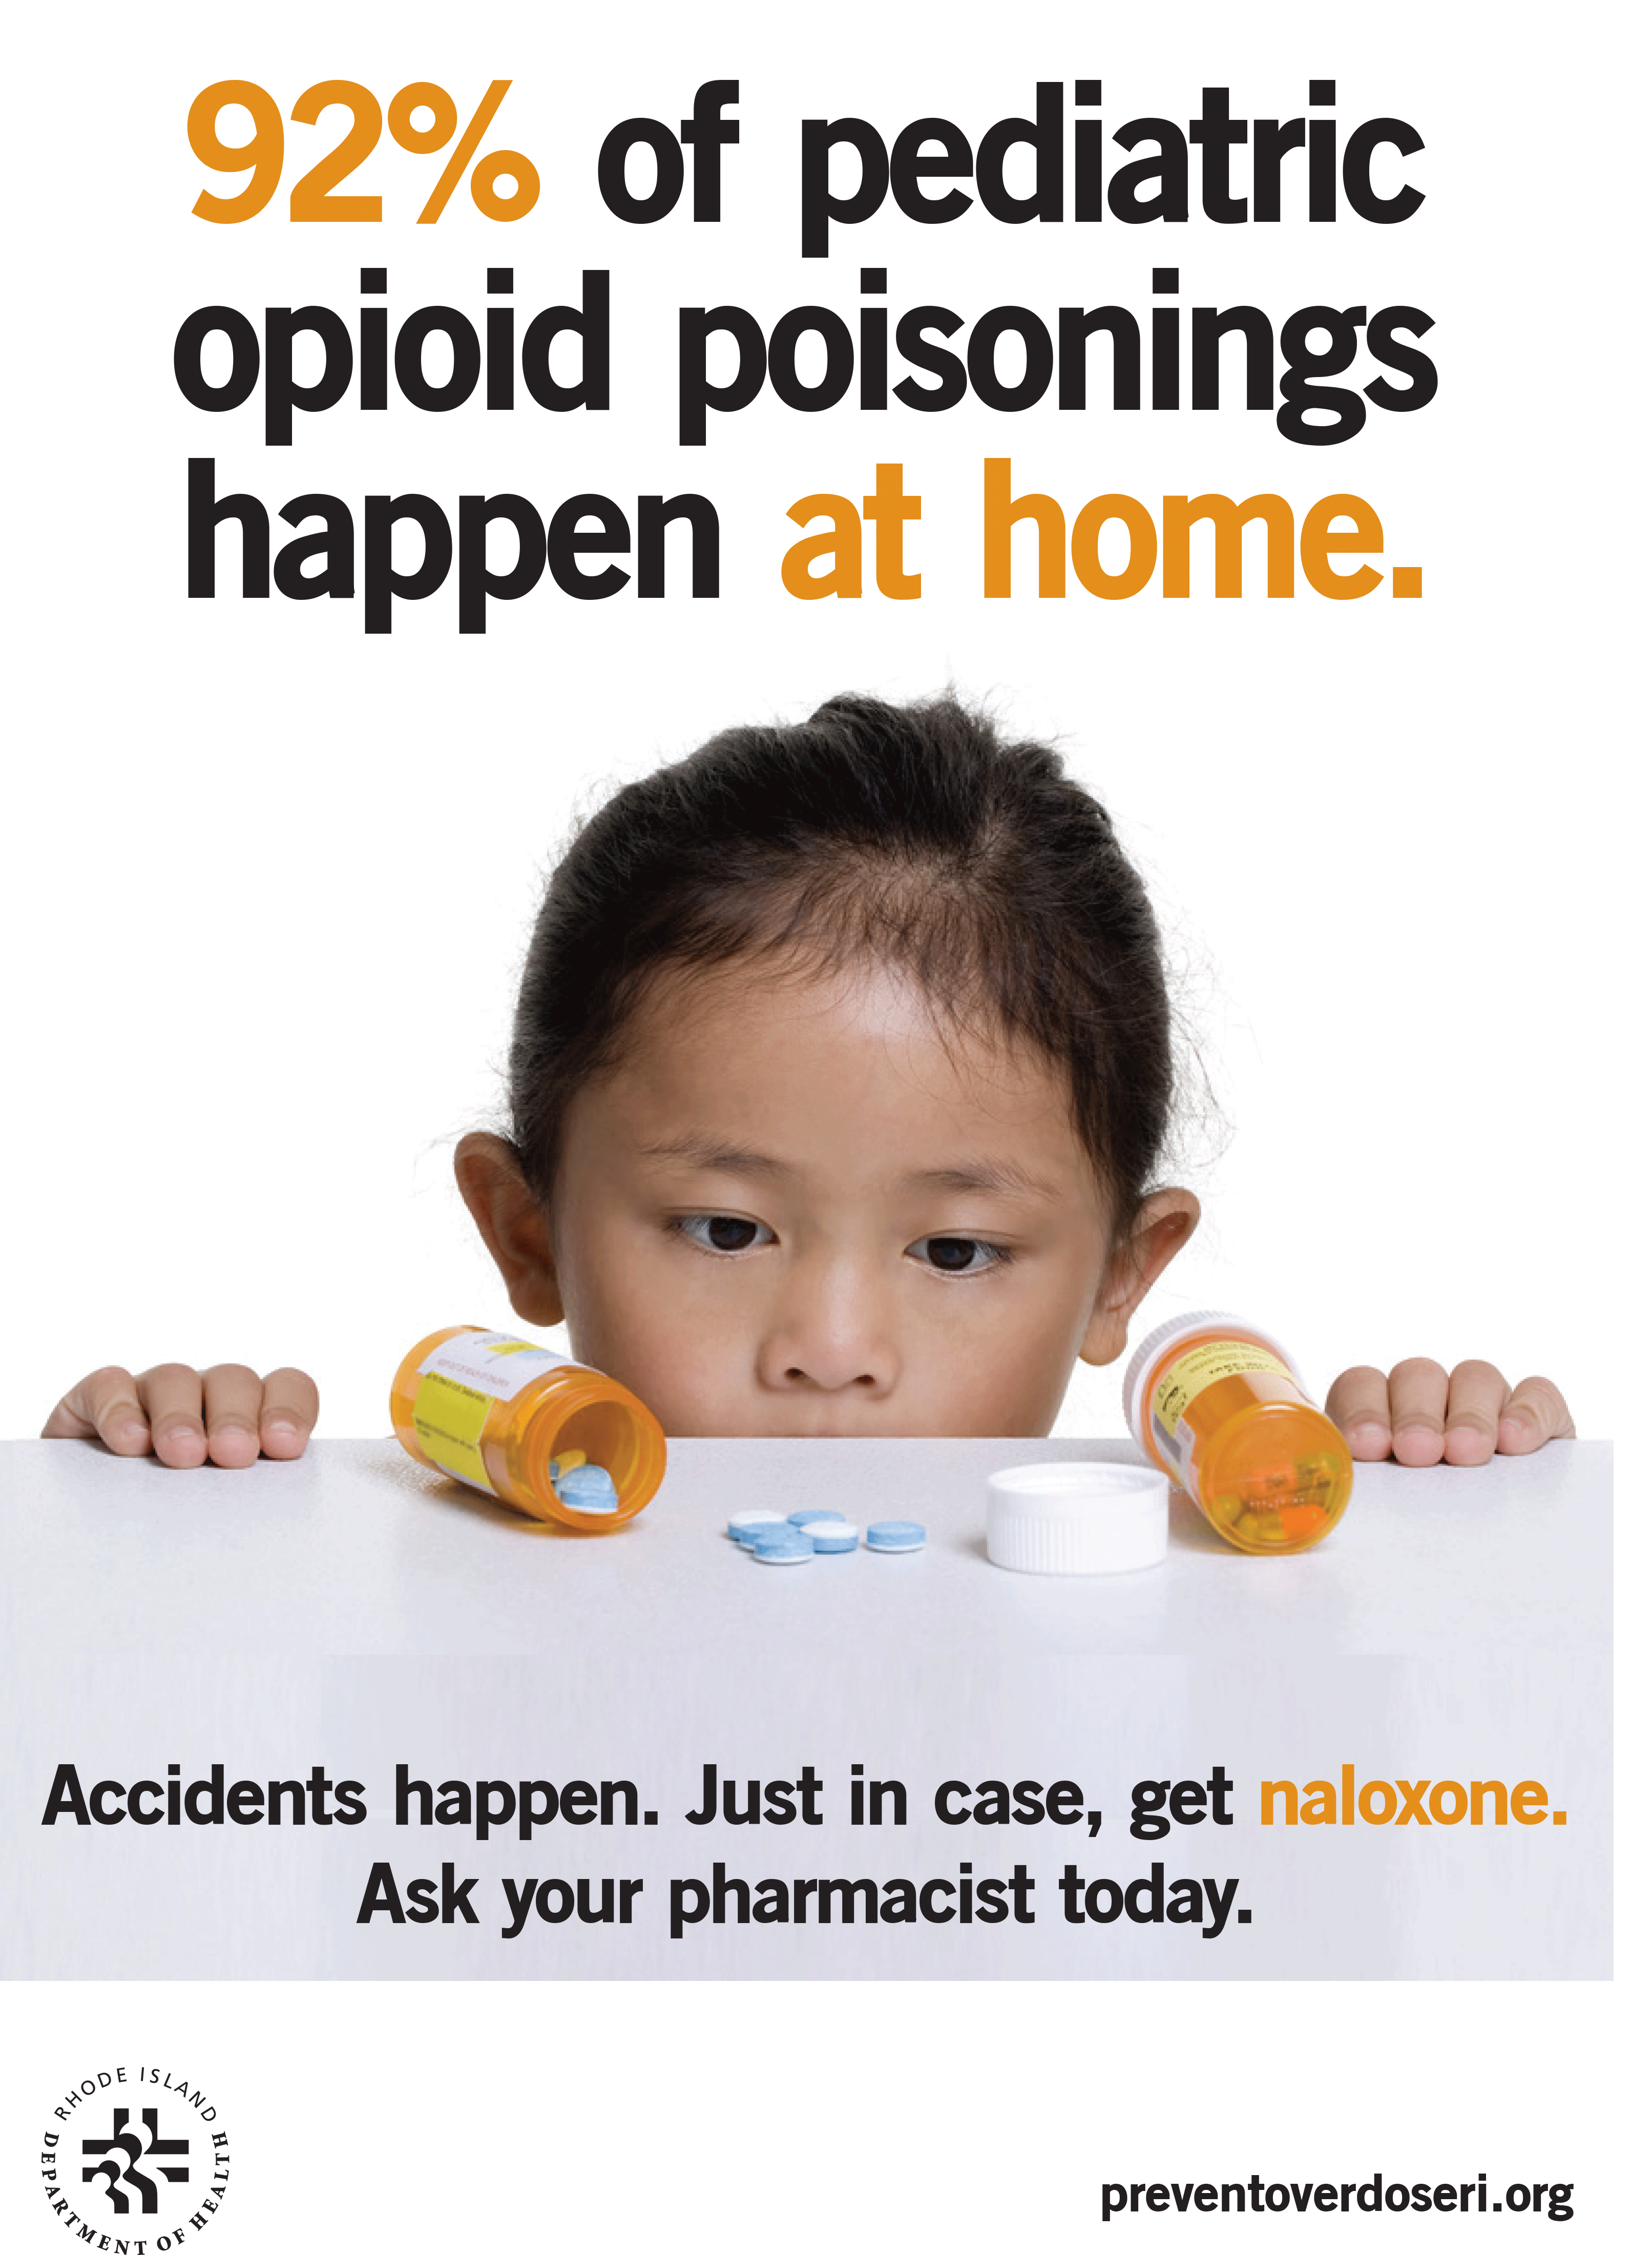 92 percent of pediatric opioid poisonings happen at home